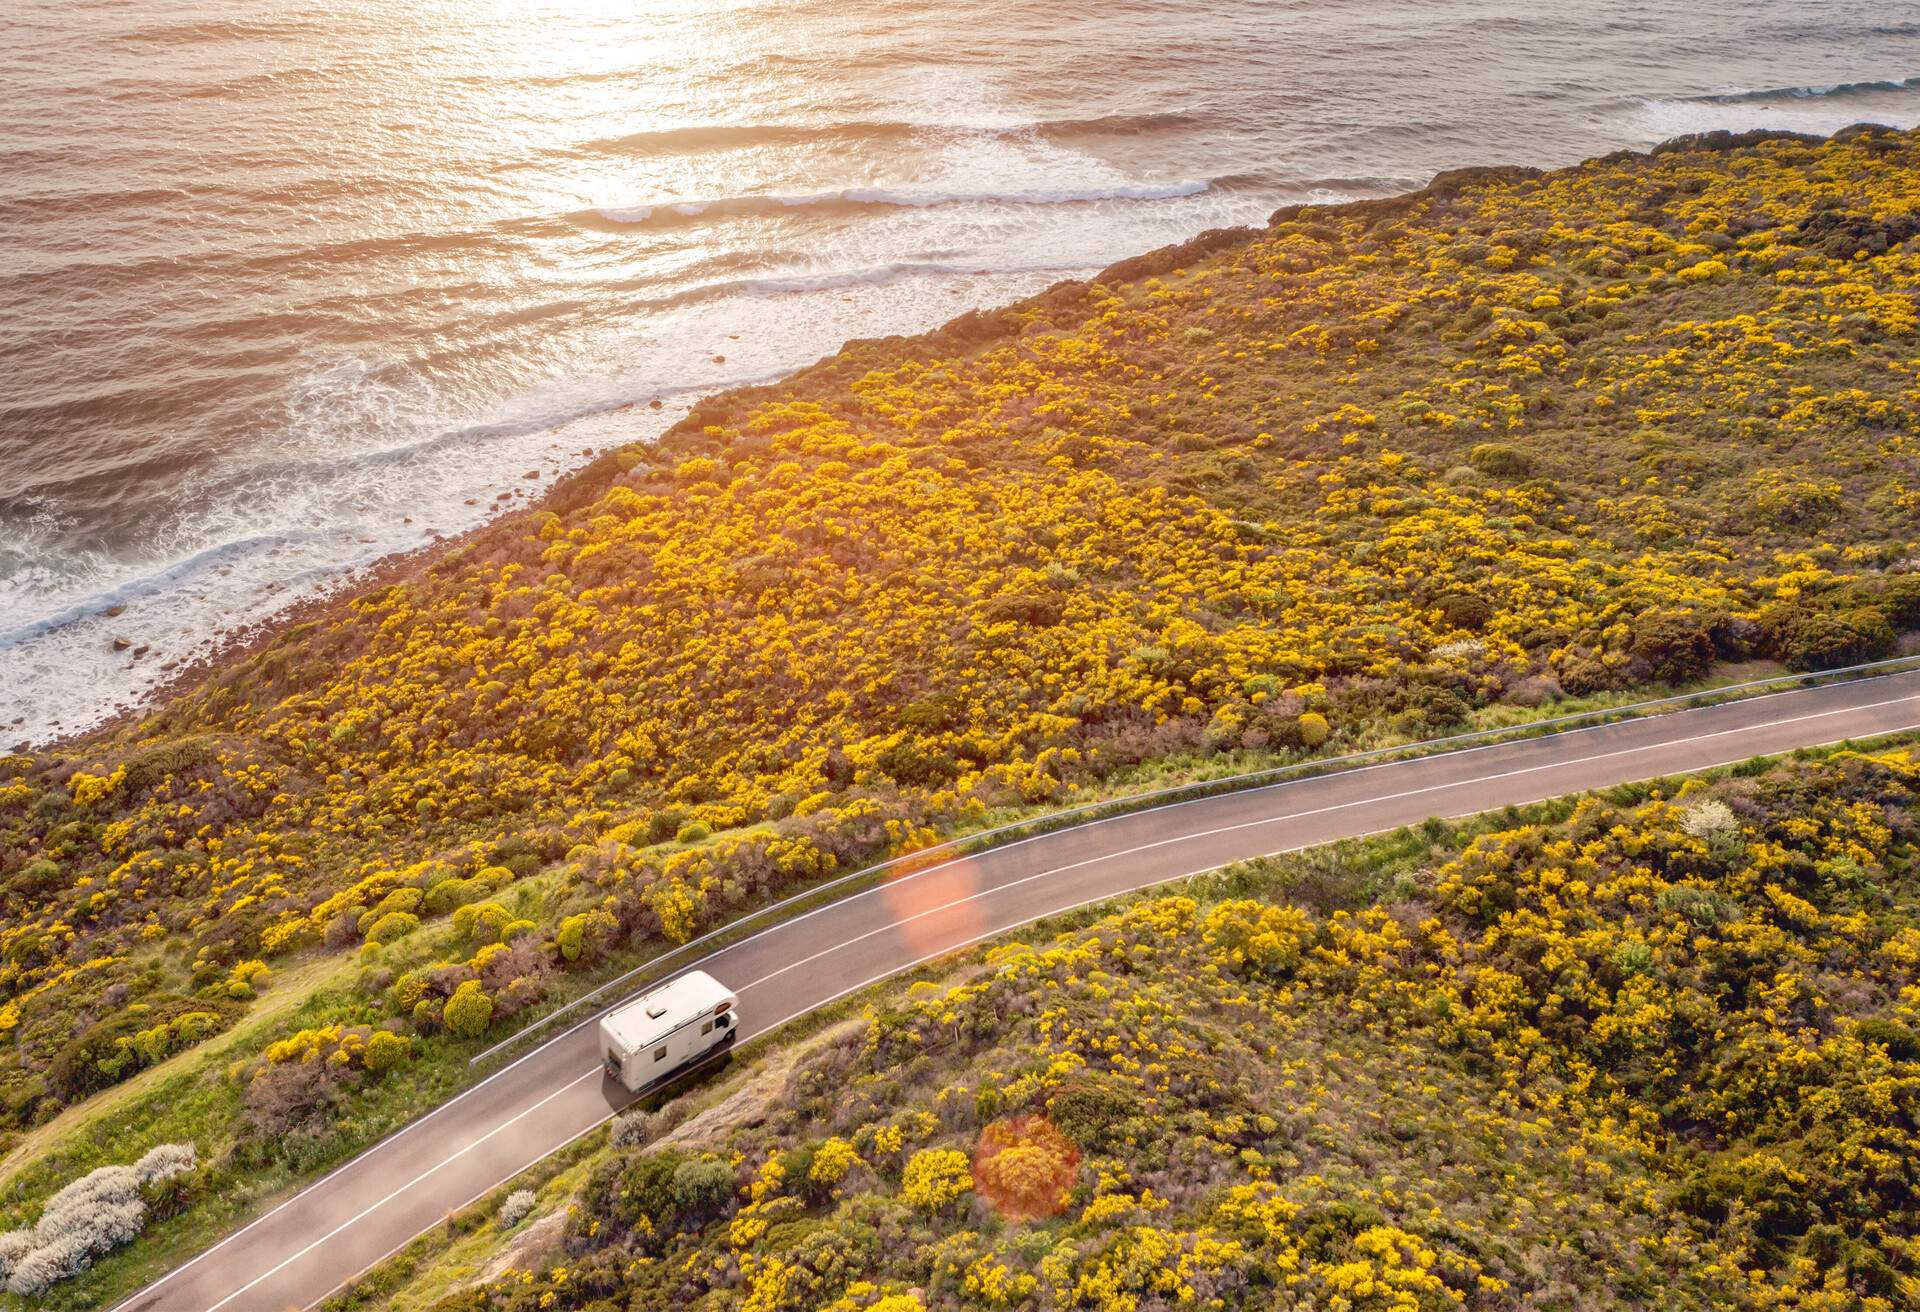 Driving a motor home on a road by the sea at sunset, with warm atmosphere and lens flare, seen from the air. Beautiful coastal scenery with sea waves breaking on a beach. Camping life, alternative lifestyle, freedom.